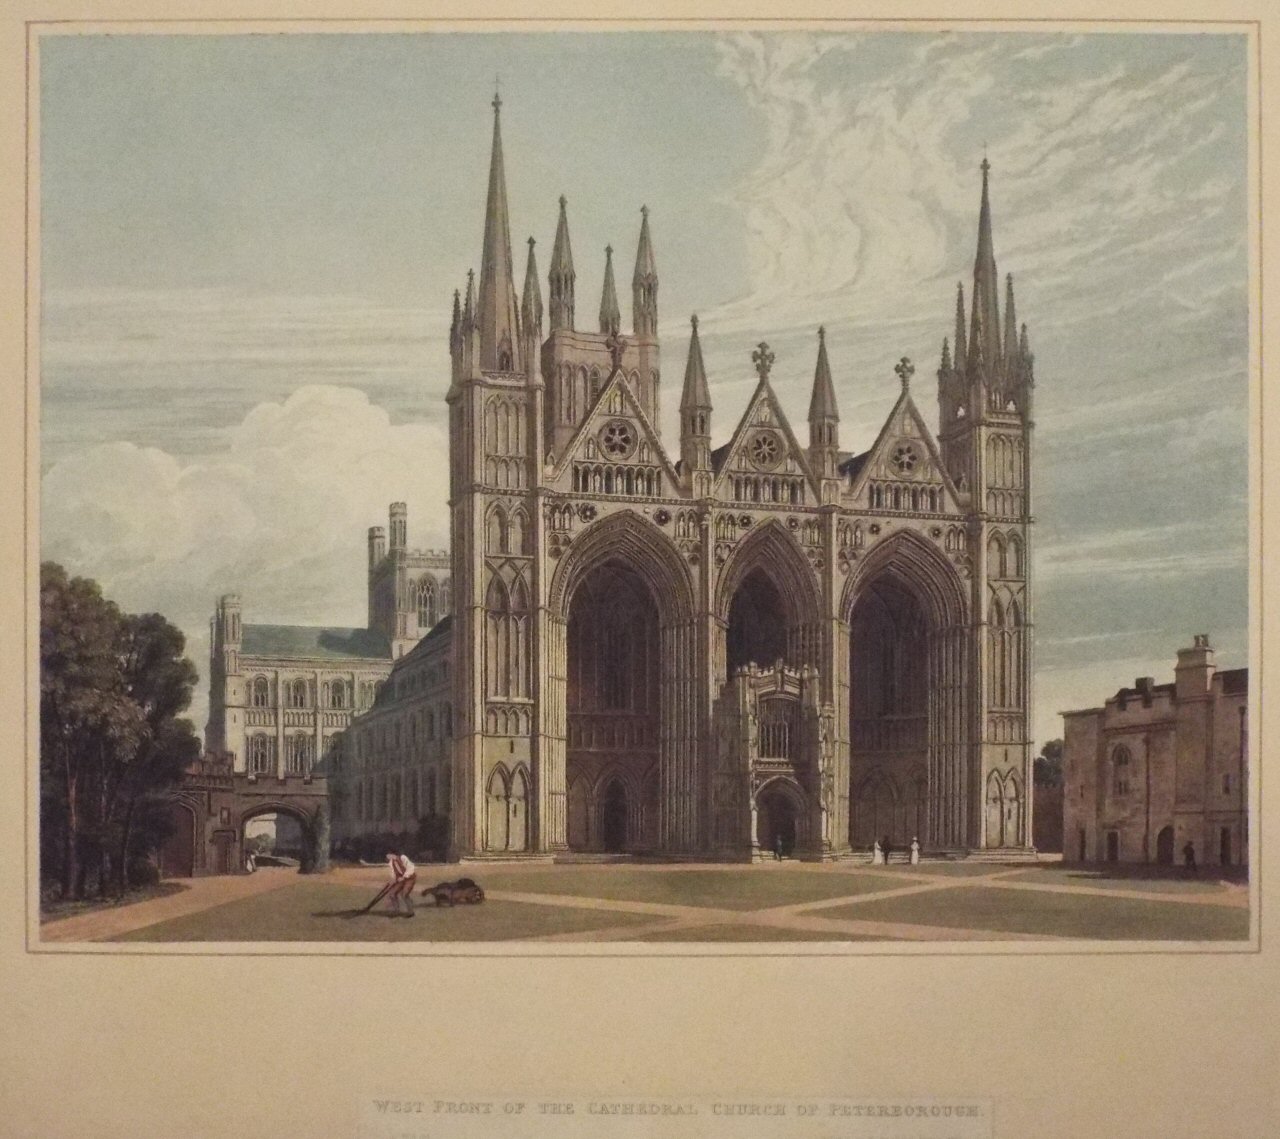 Aquatint - West Front of the Cathedral Church of Peterborough.